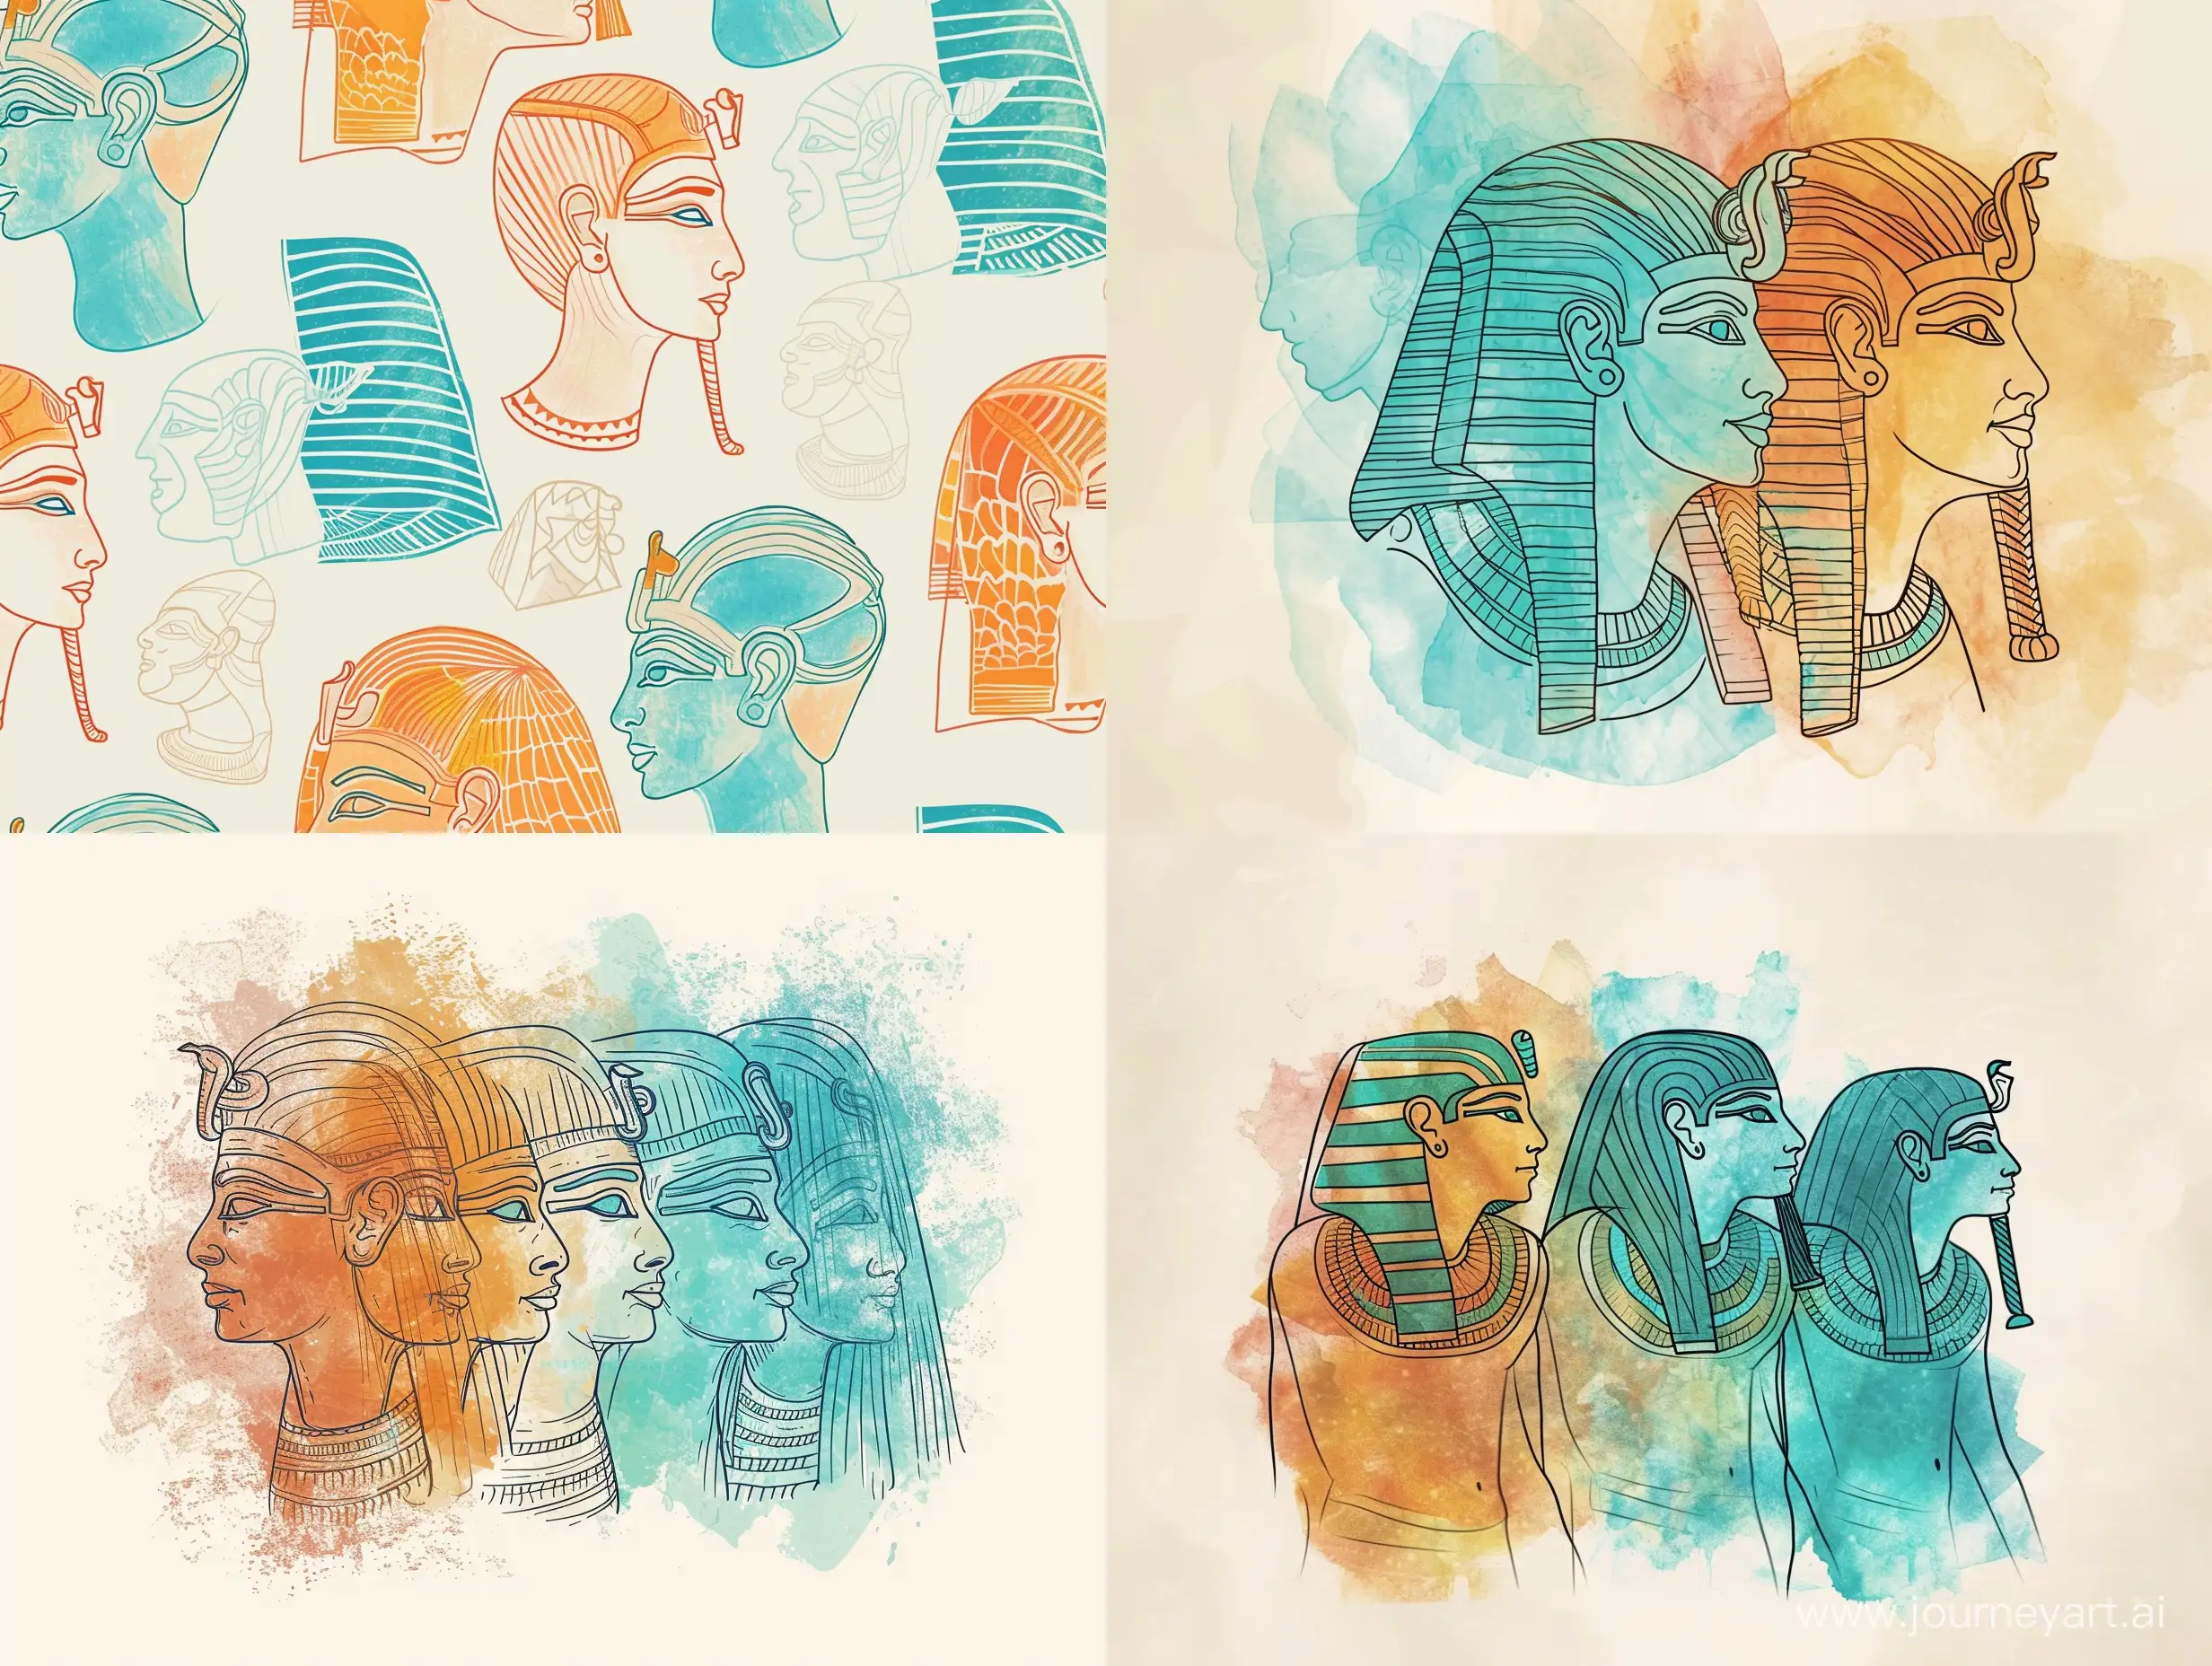 outlines of ancient Egypt, on a light background, delicate colors, linear, colors, ochre, orange, turquoise, light brown, blue stylized caricature, watercolor, decorative, flat drawing